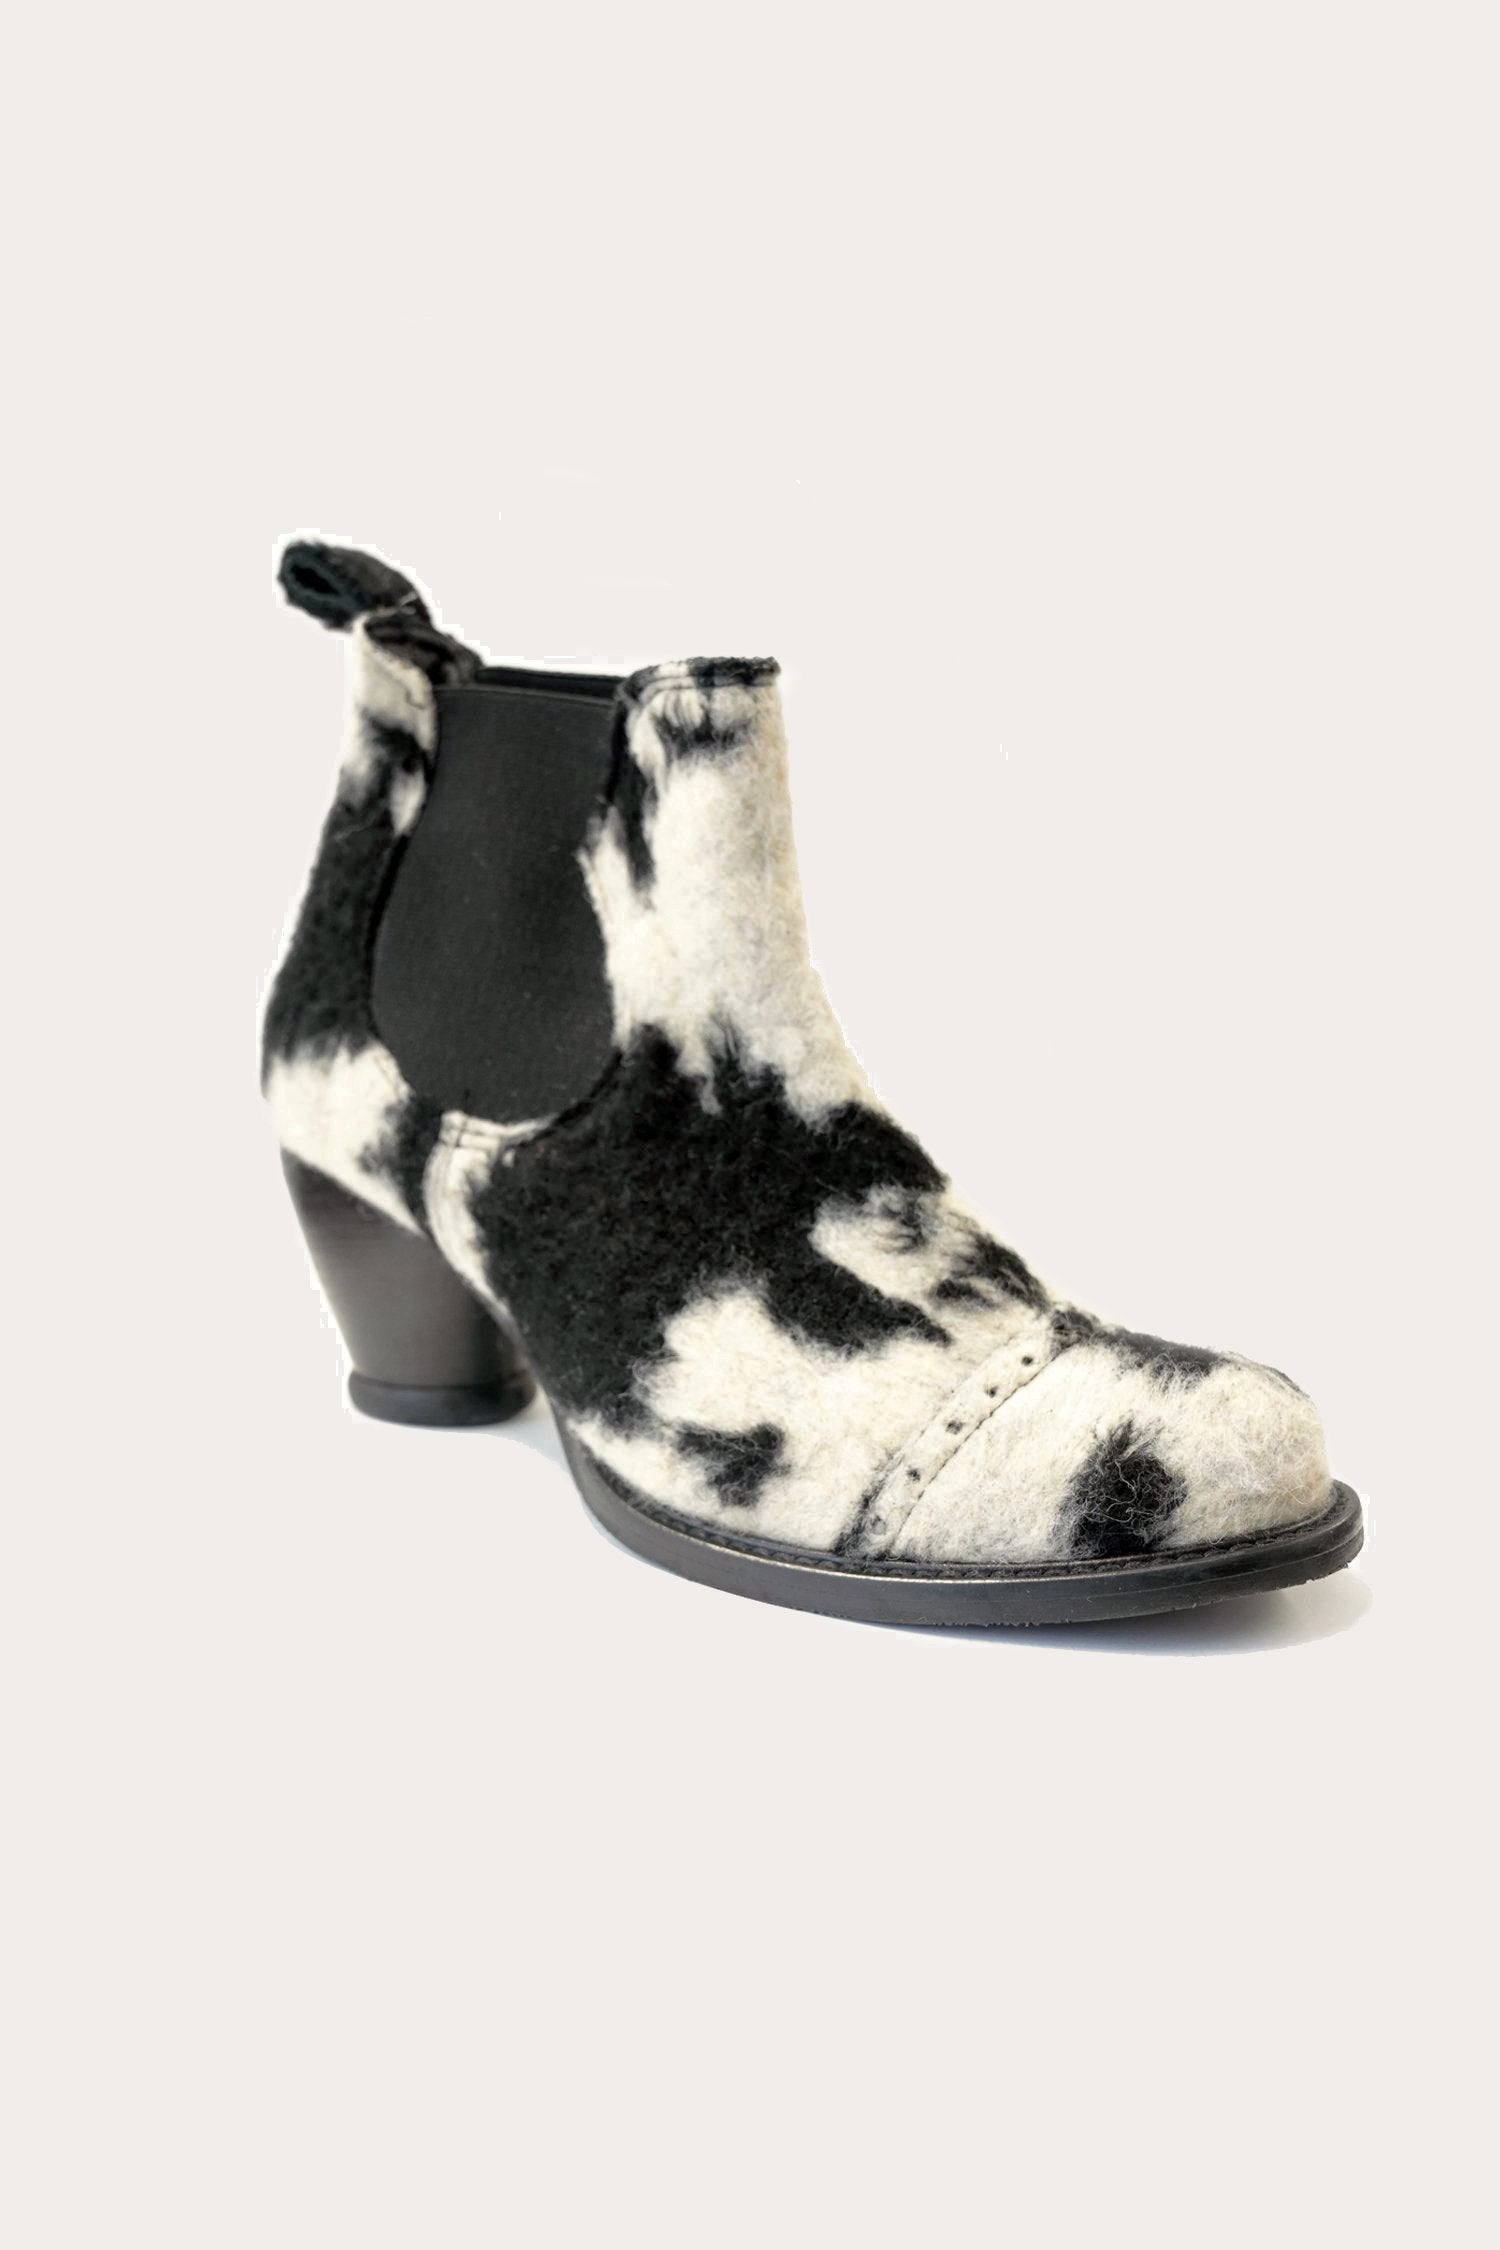 Cowhide Chelsea Boot, high heel, black/white fir, black side elastic, and strap on the back 